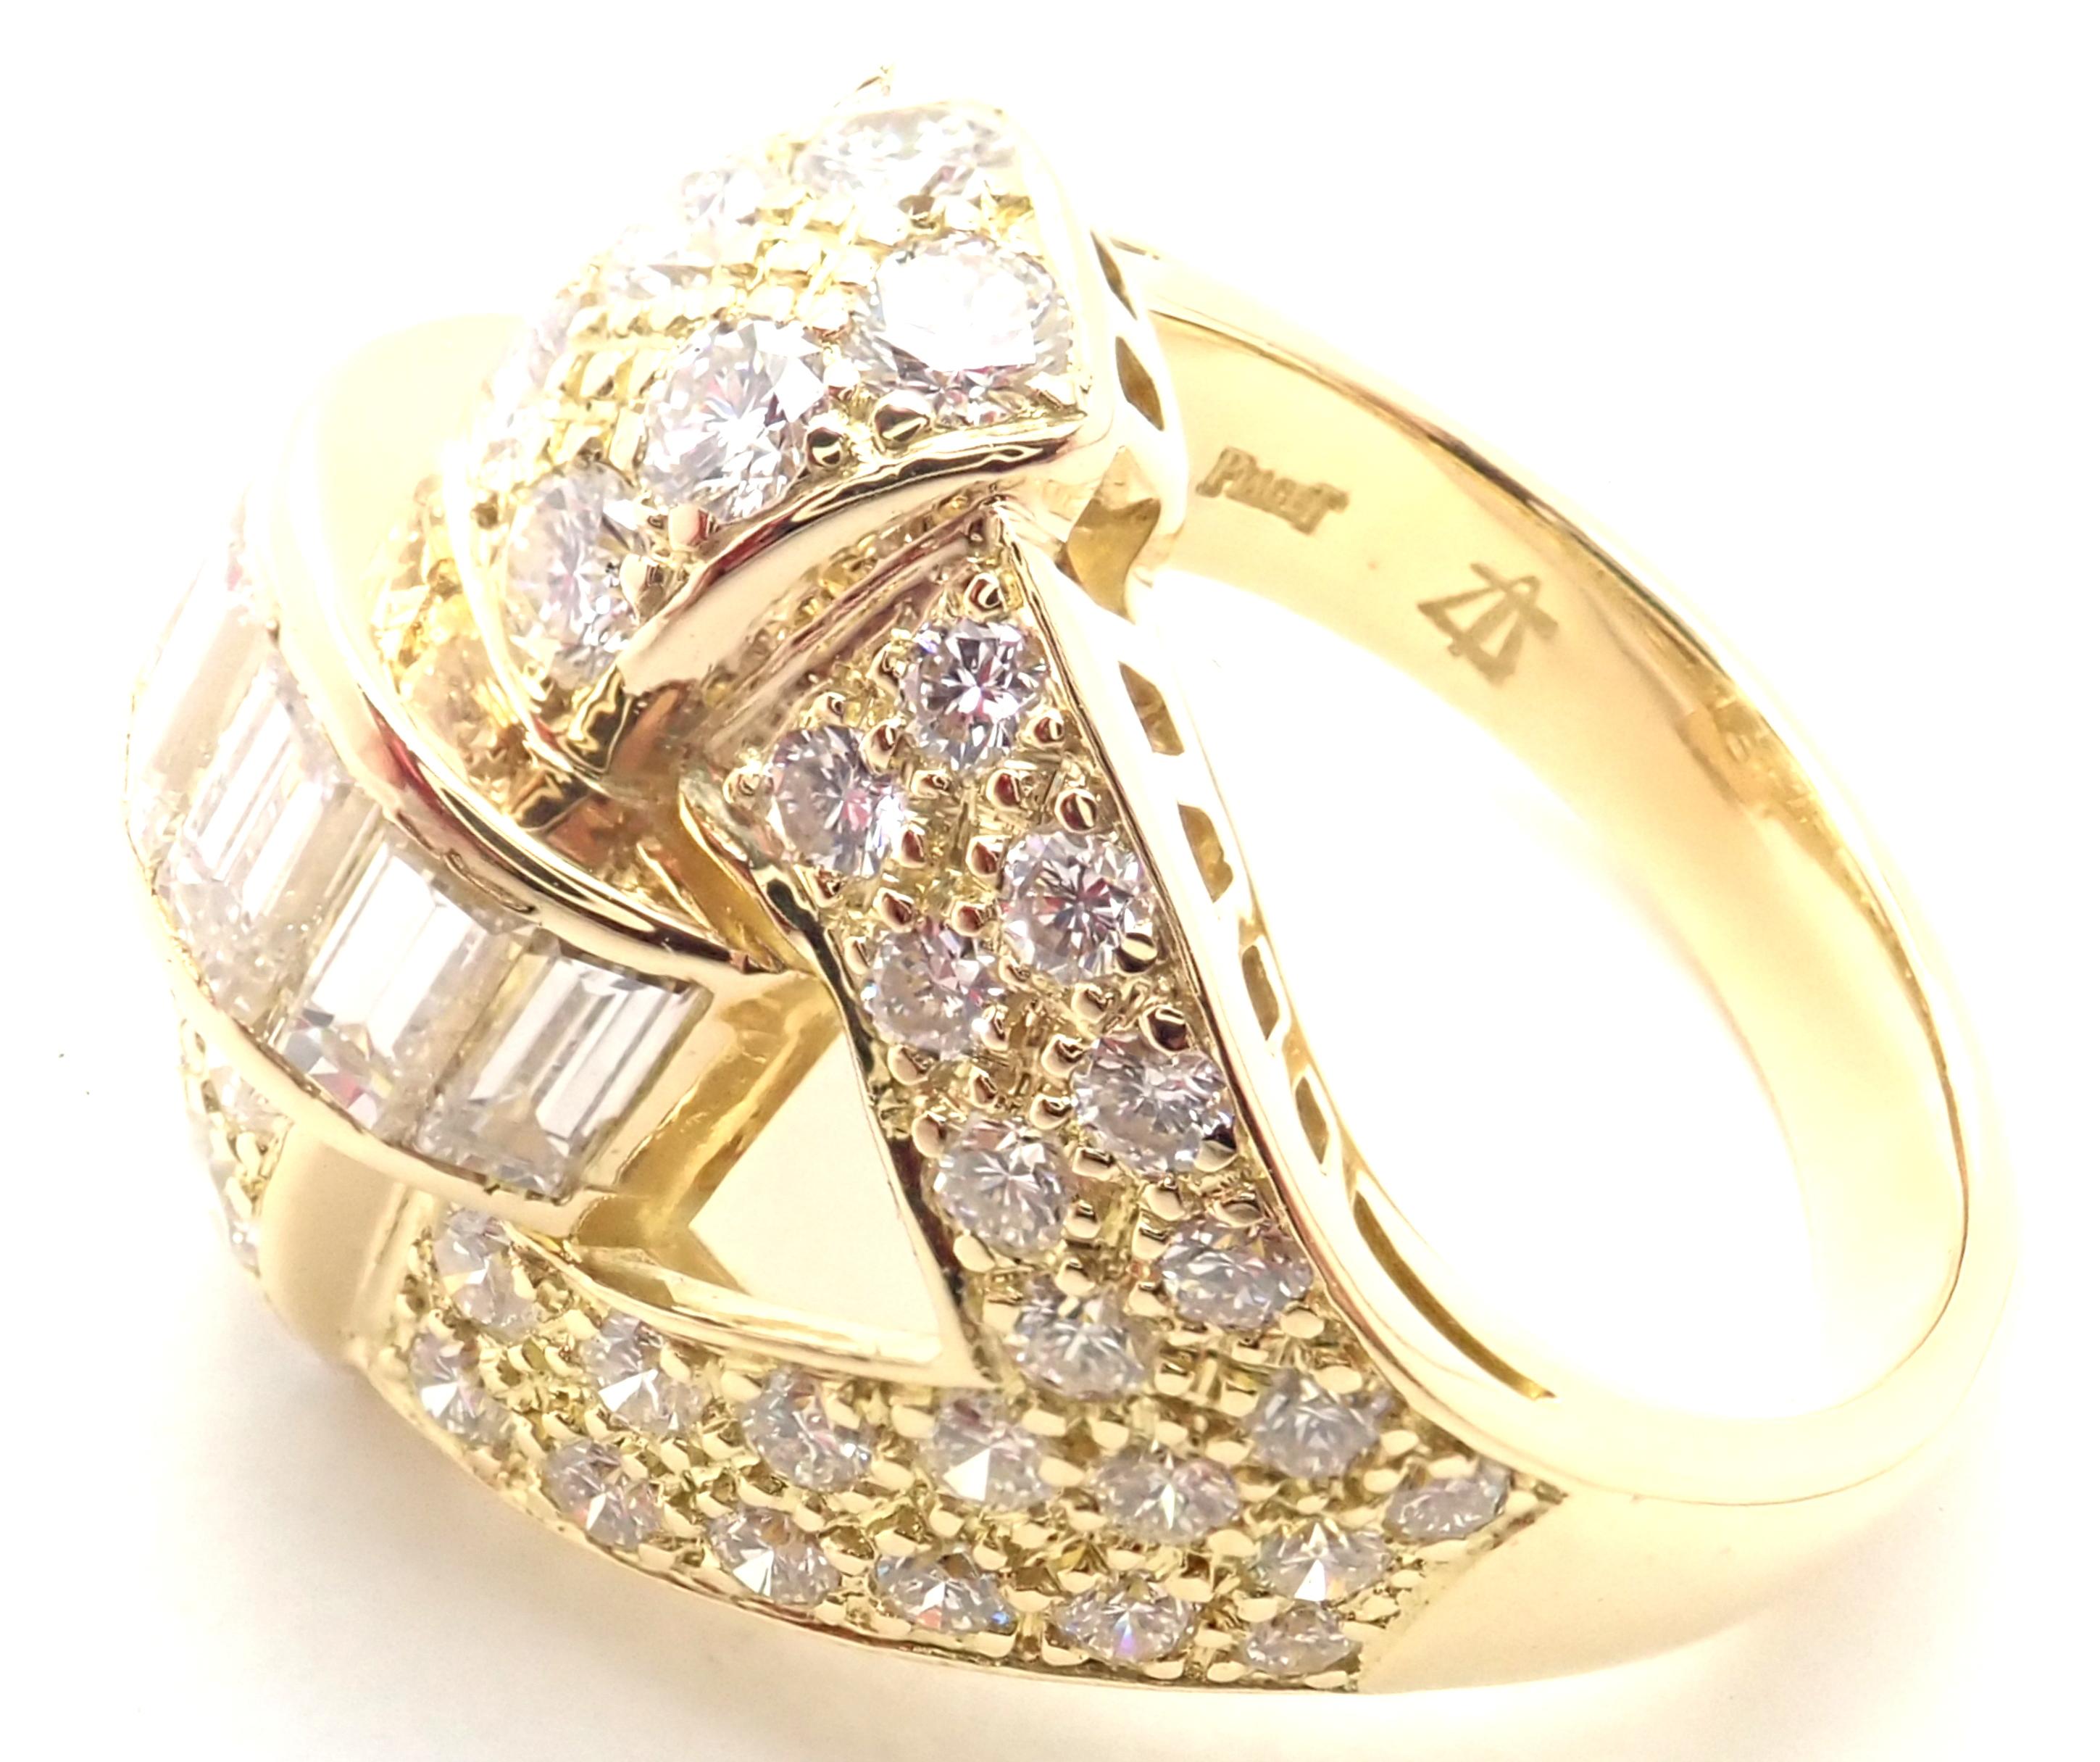 Vintage Piaget 3ct Diamond Yellow Gold Cocktail Ring In Excellent Condition For Sale In Holland, PA